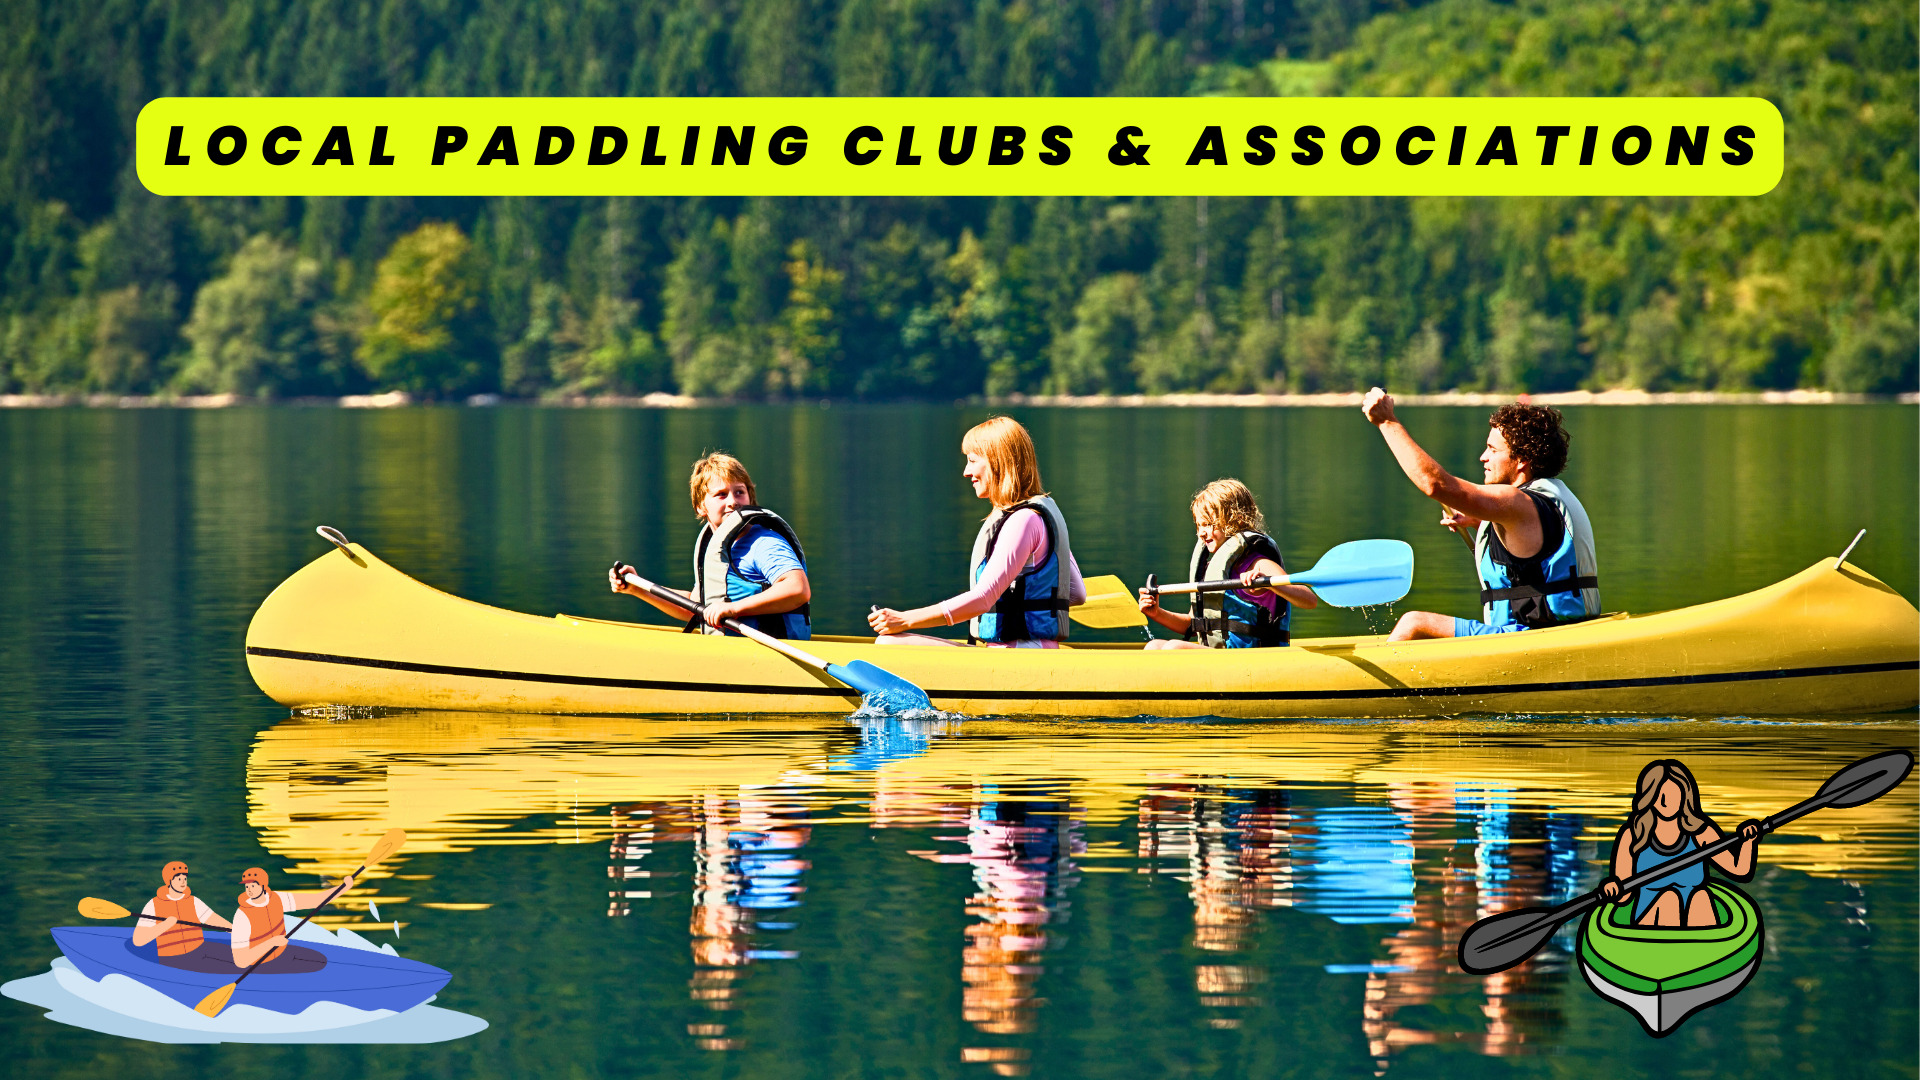 Find Paddling Clubs